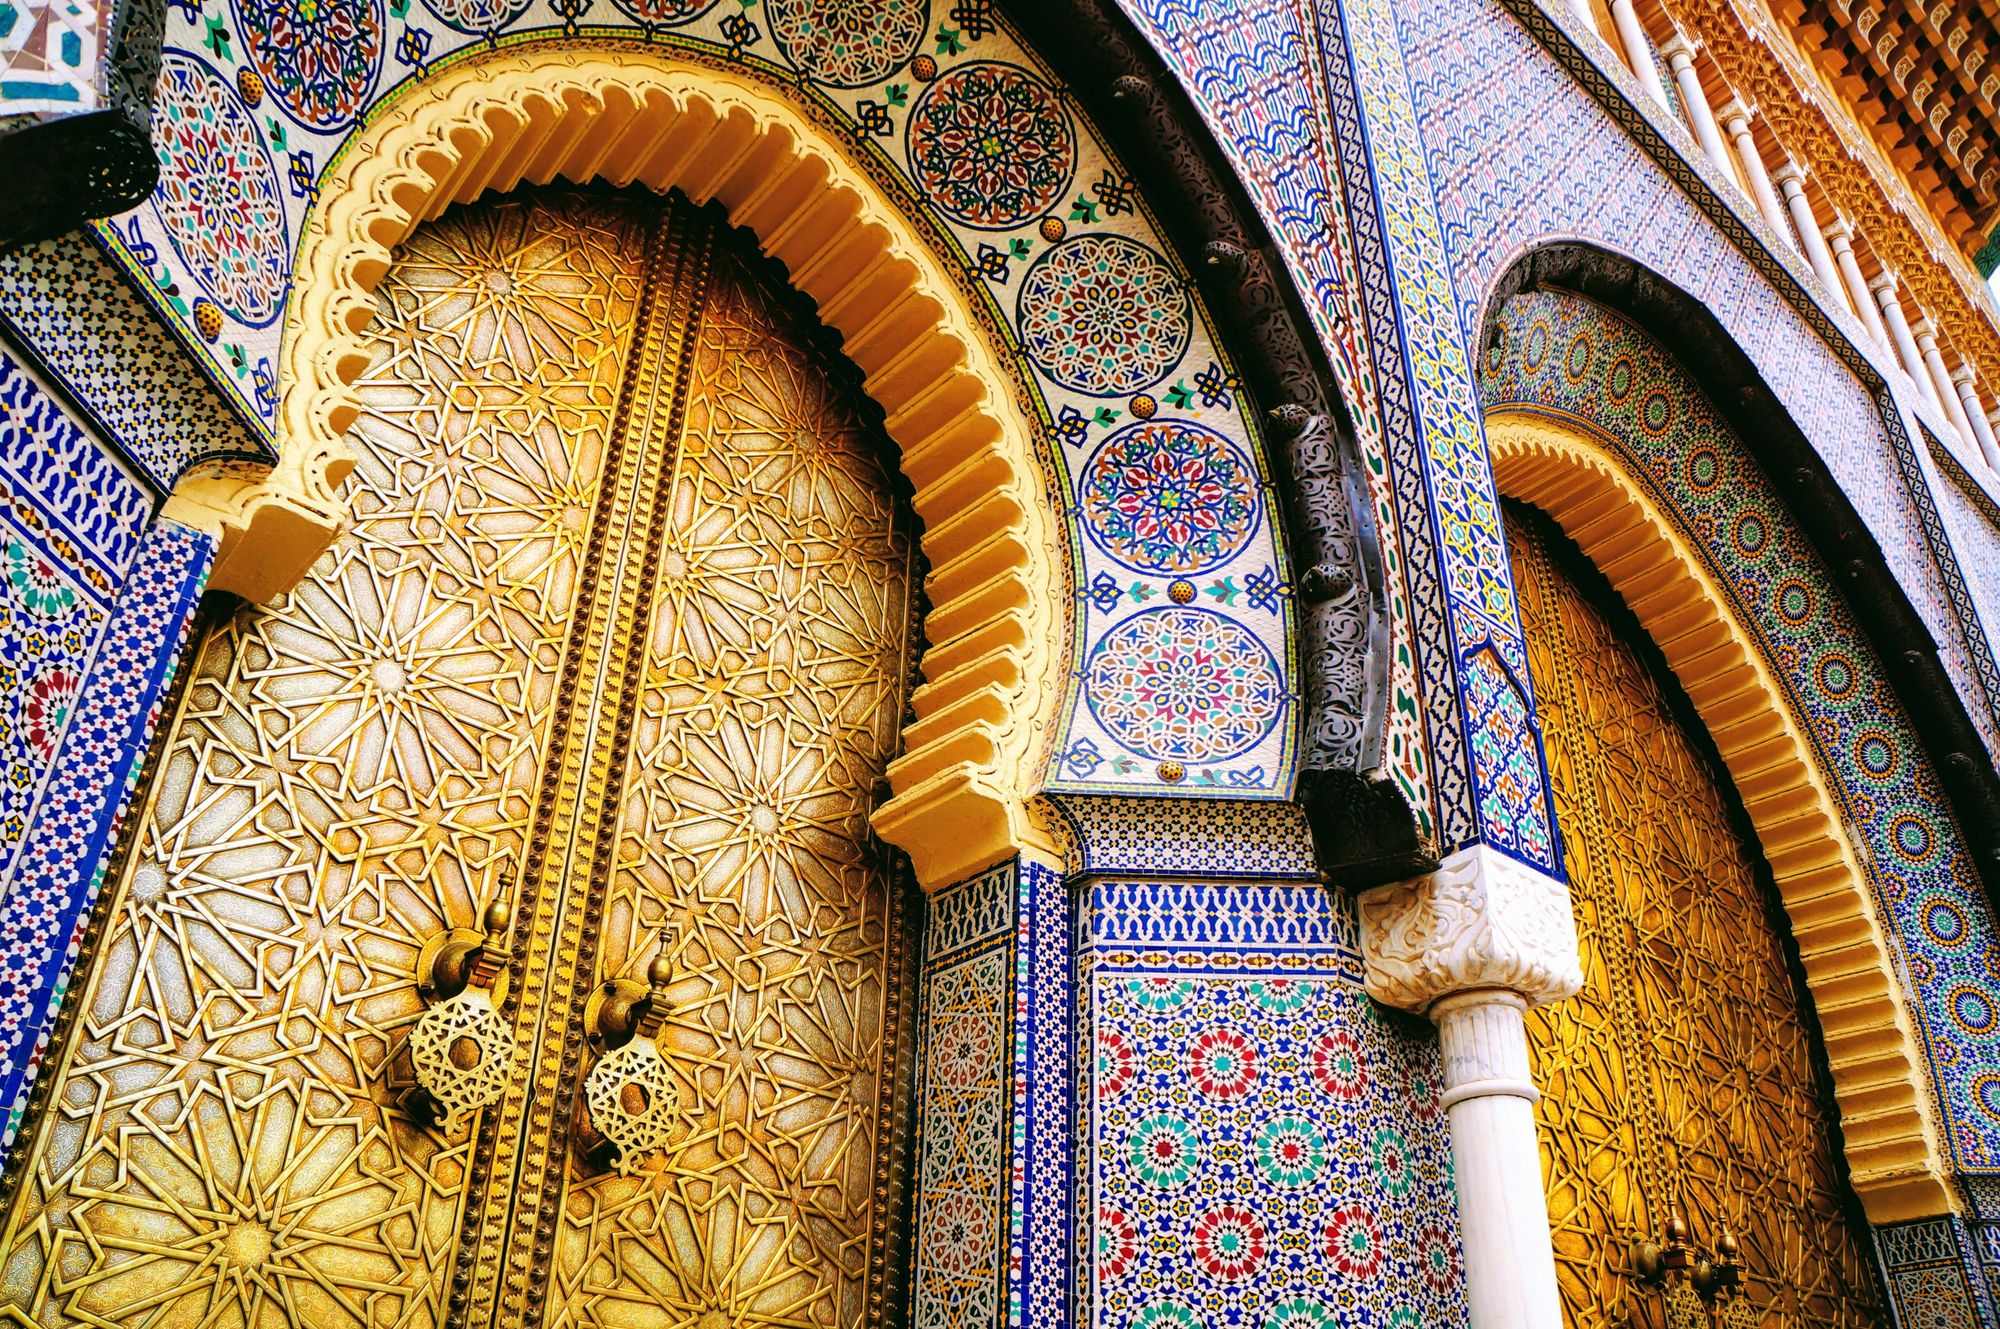 Splendours of Moroccan craftsmanship at the Royal Palace in Rabat